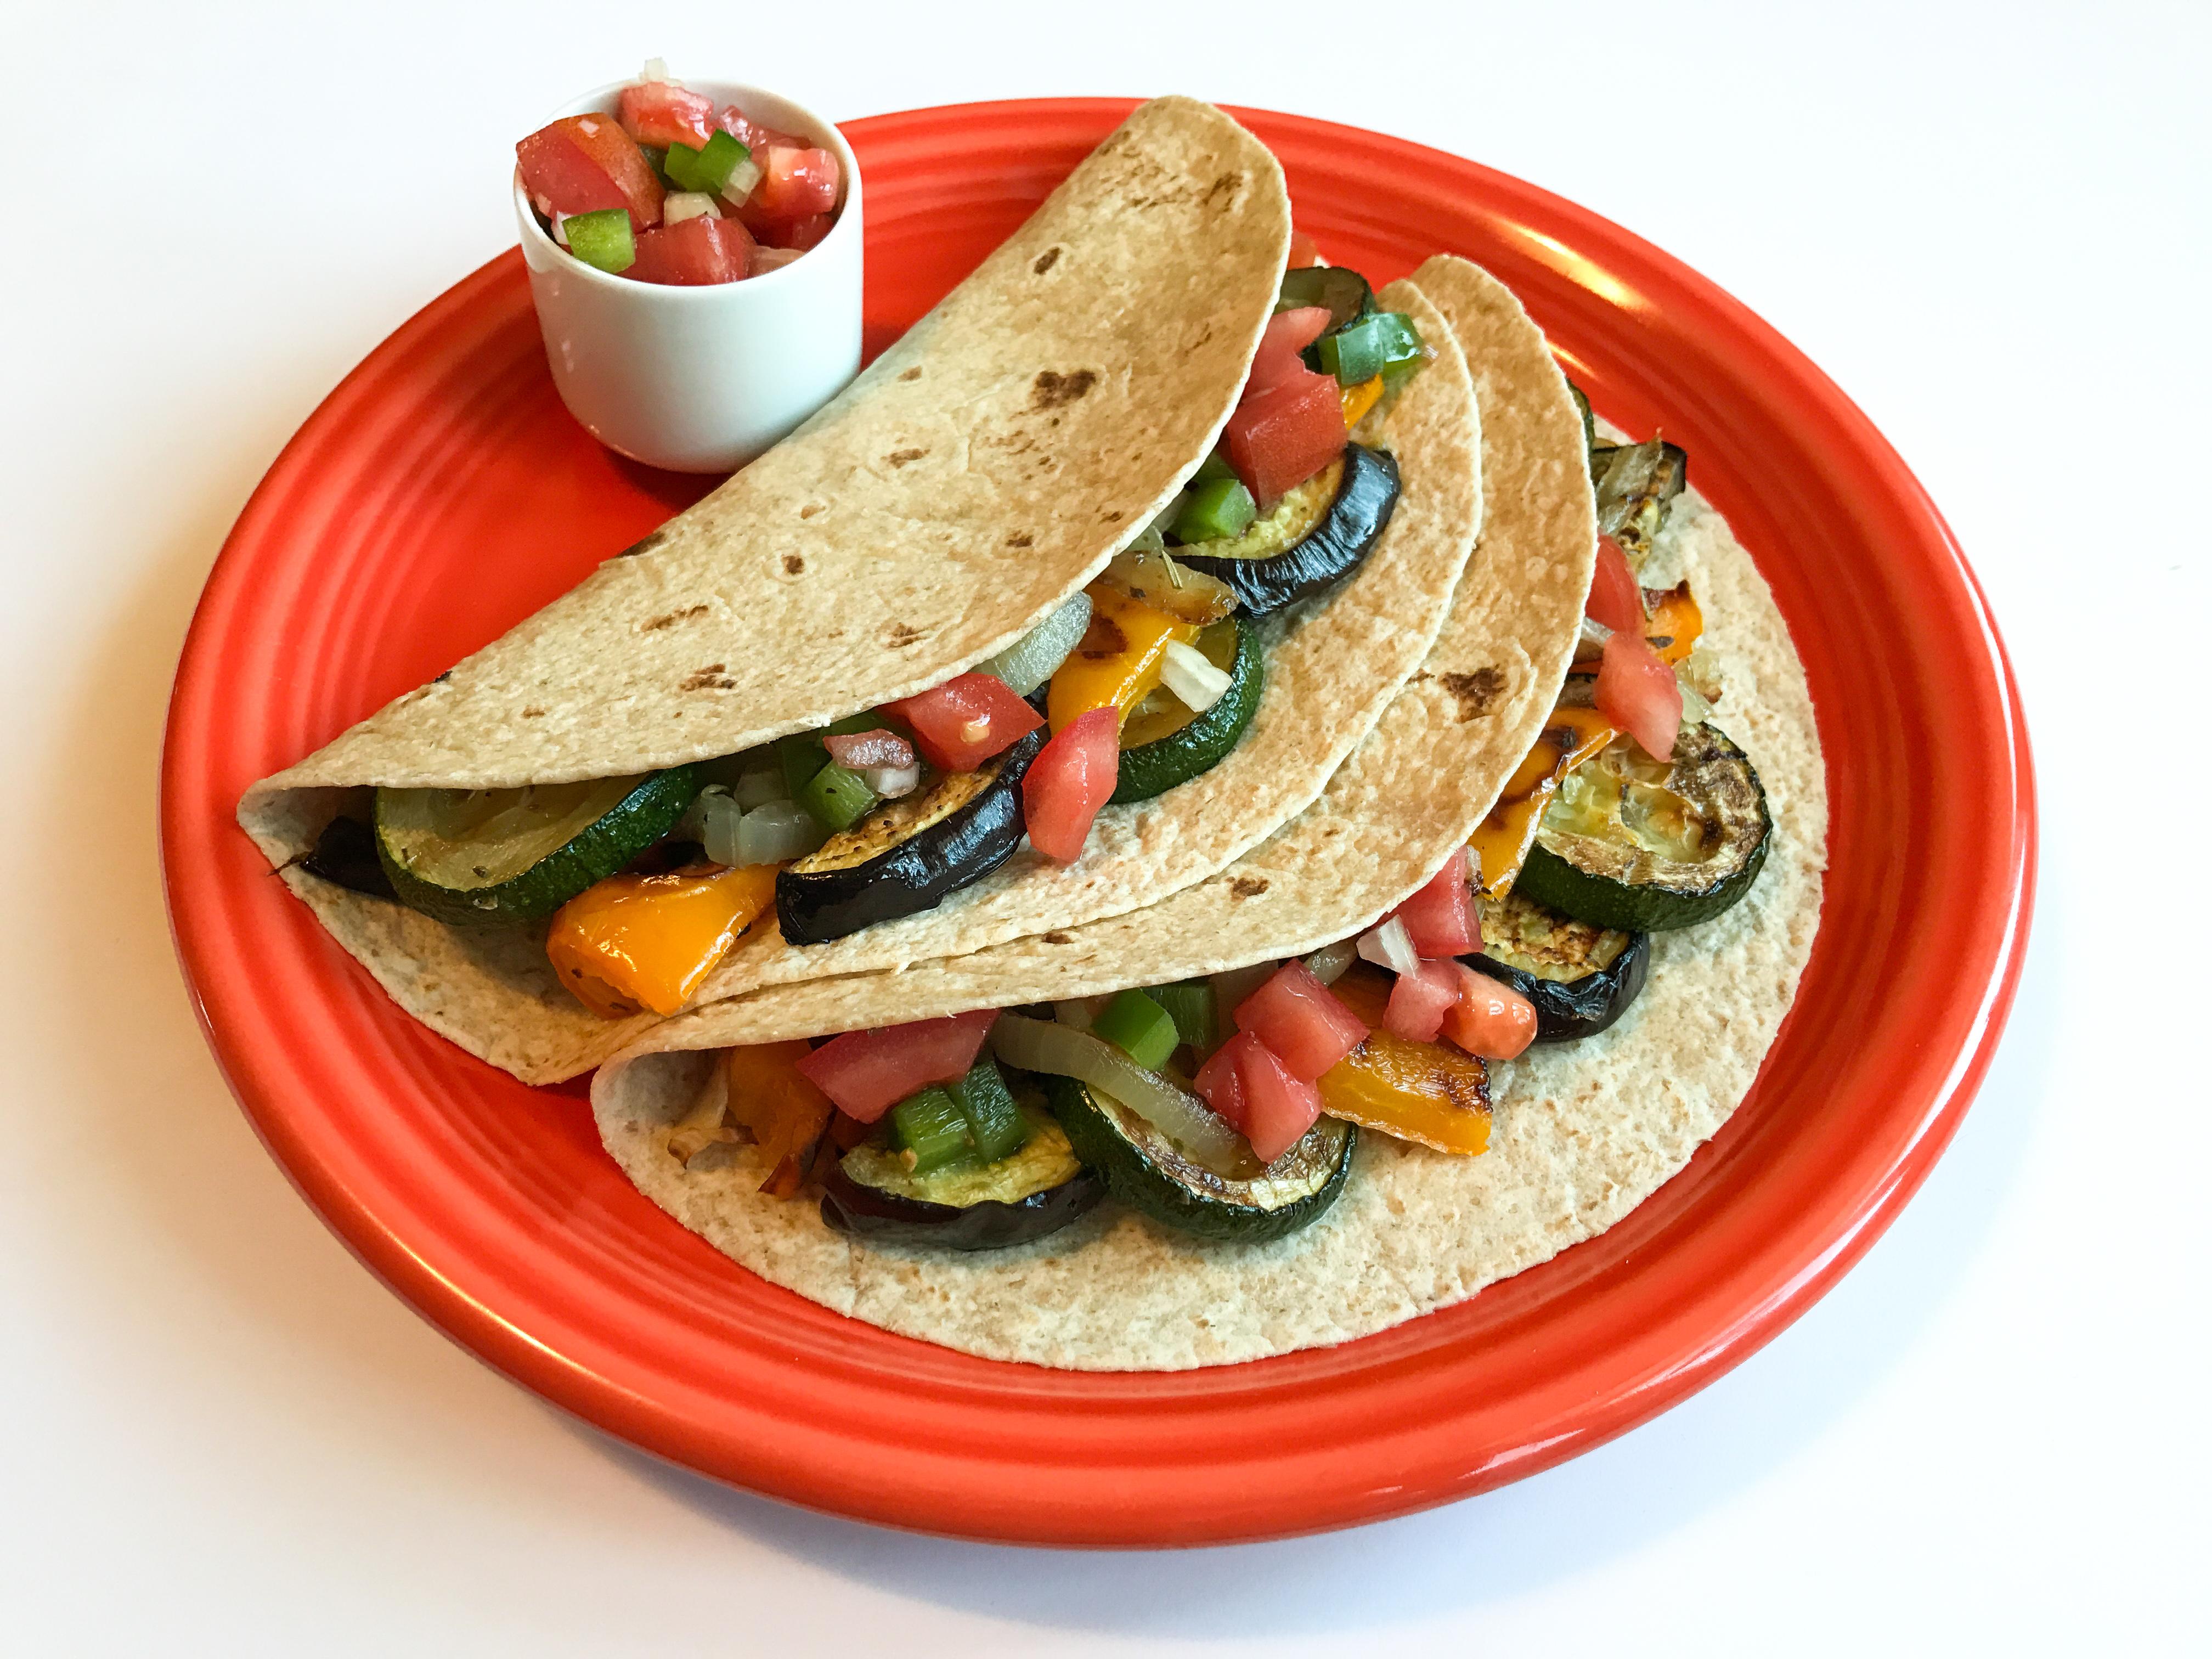 Two fajitas in a whole wheat tortilla with zucchini, bell peppers, and tomatoes served on an orange plate.